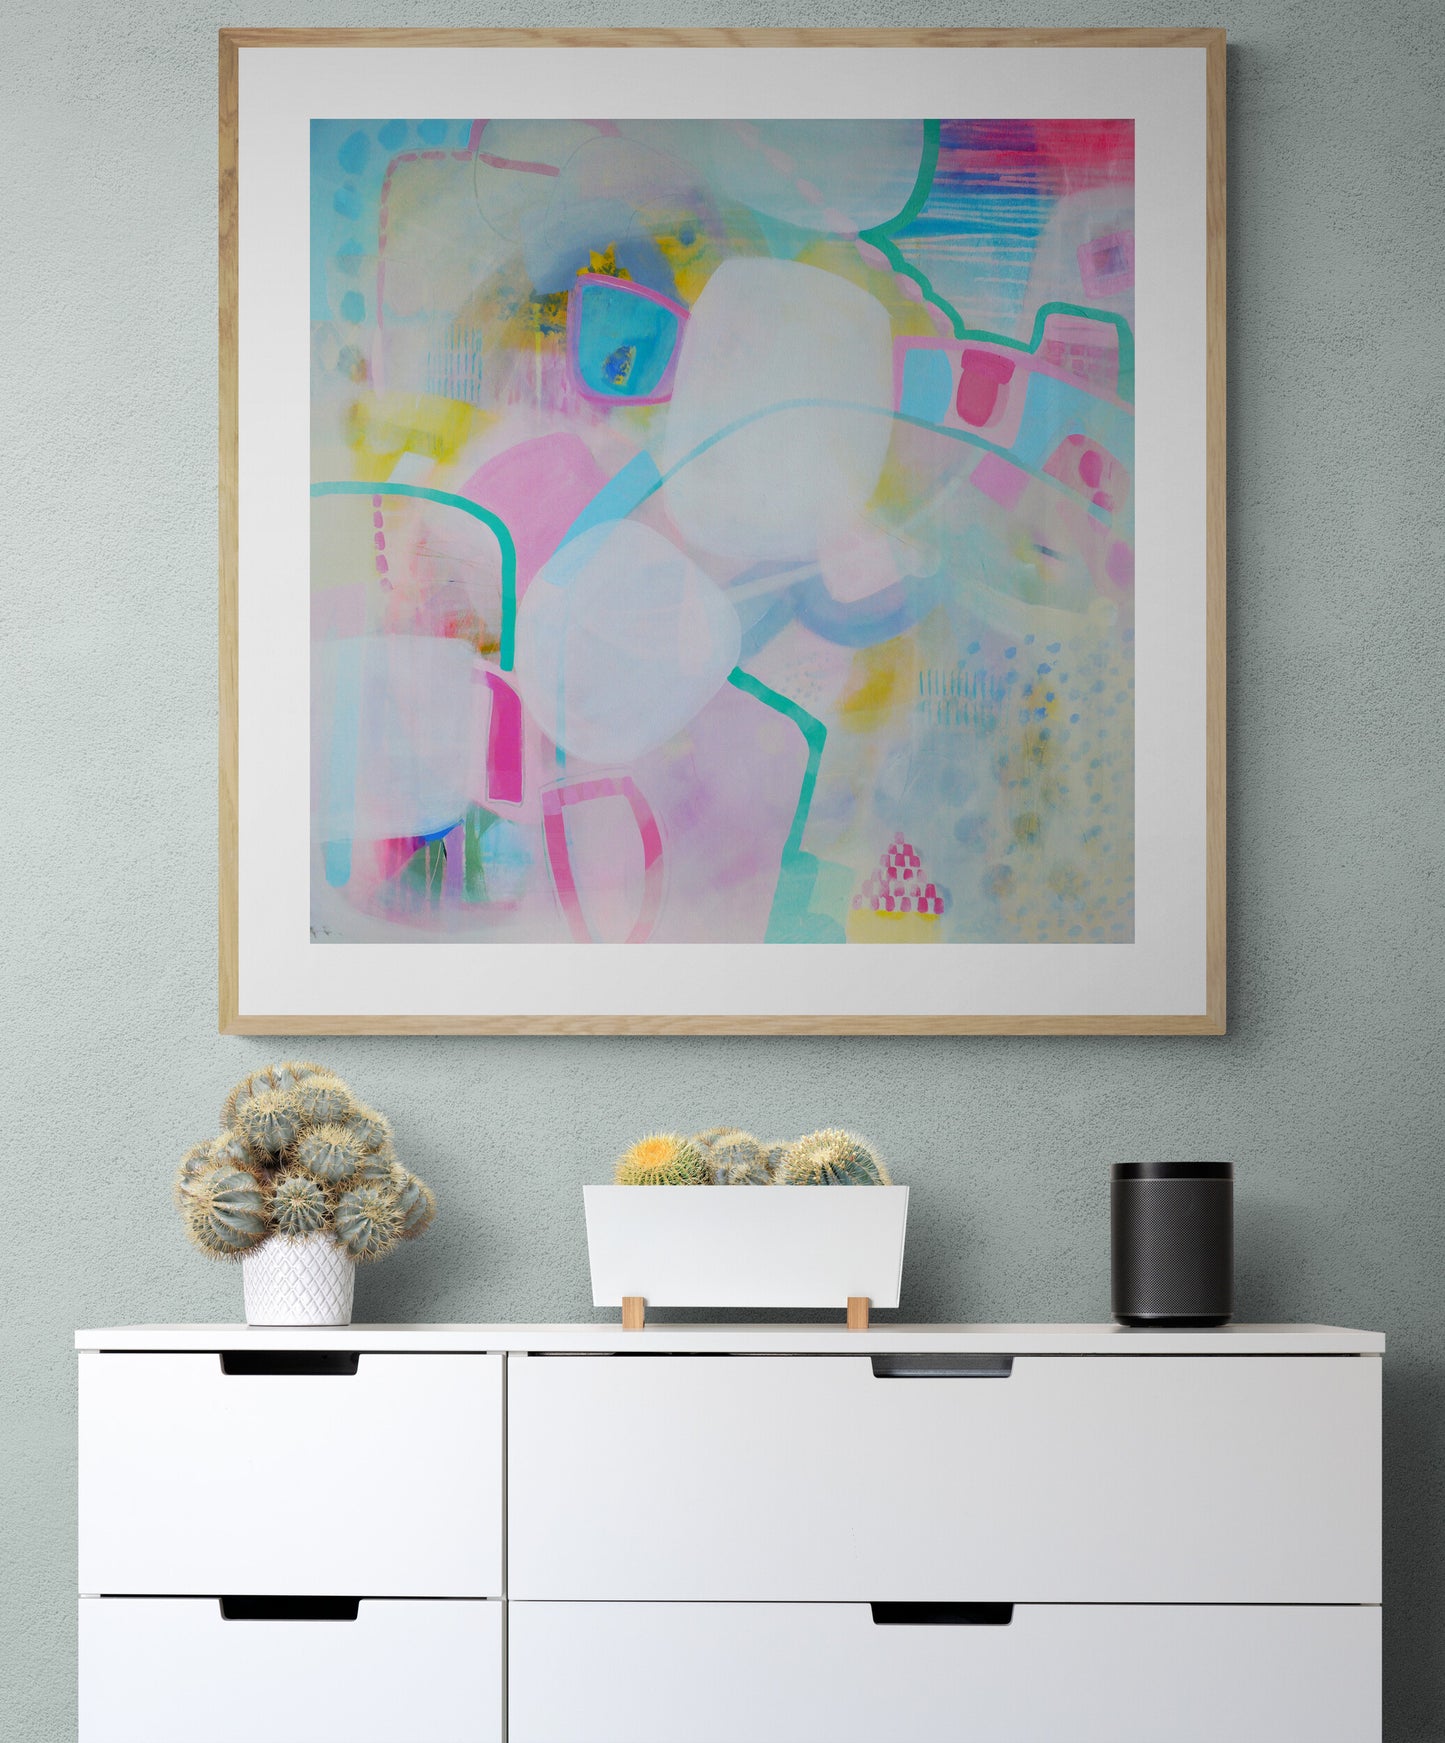 Large Abstract Art Giclee Print on Stretched Canvas or Fine Art Paper